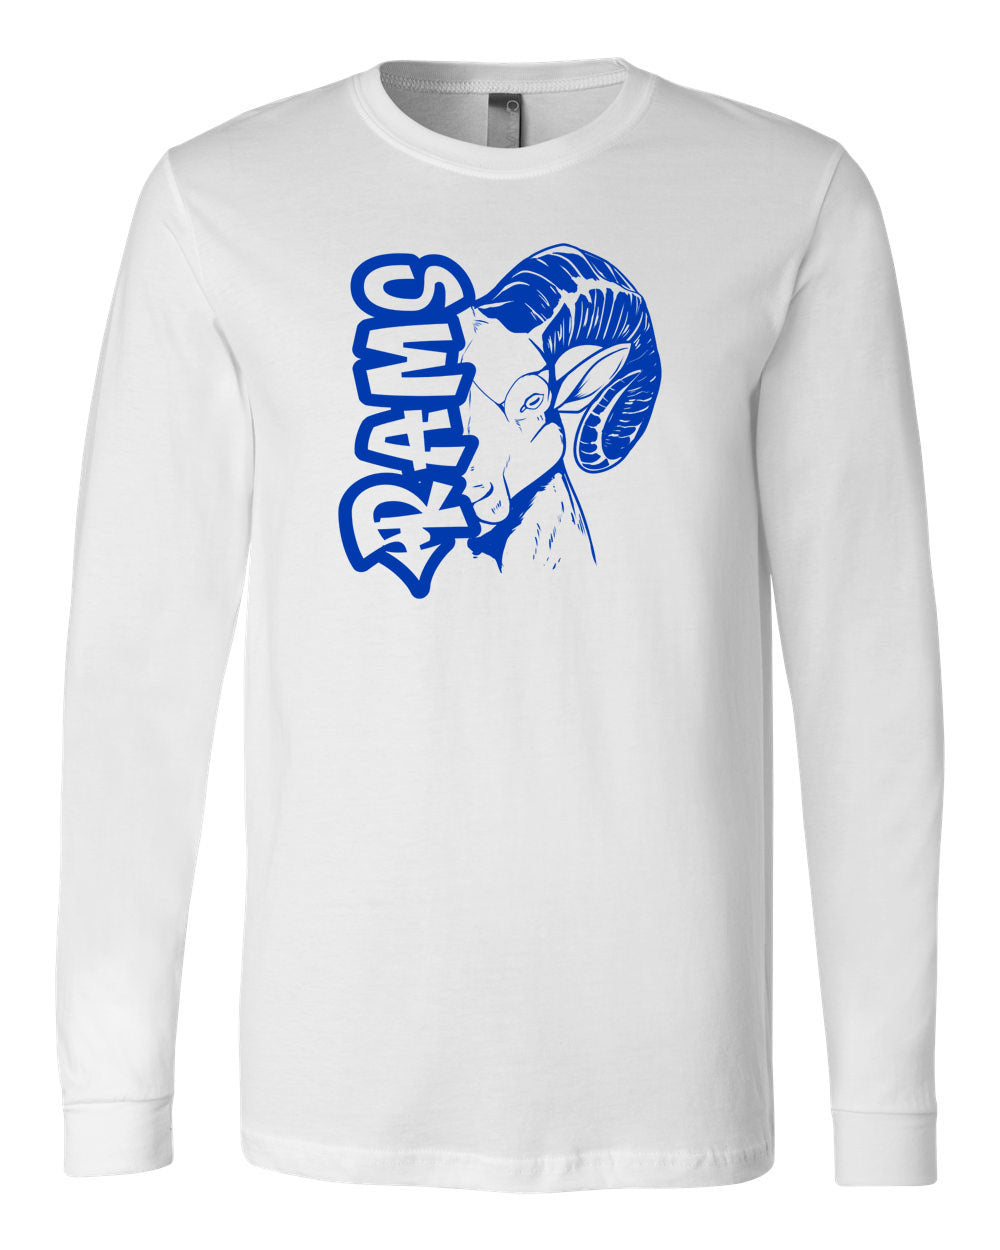 Sussex Middle Design 7 Long Sleeve Shirt